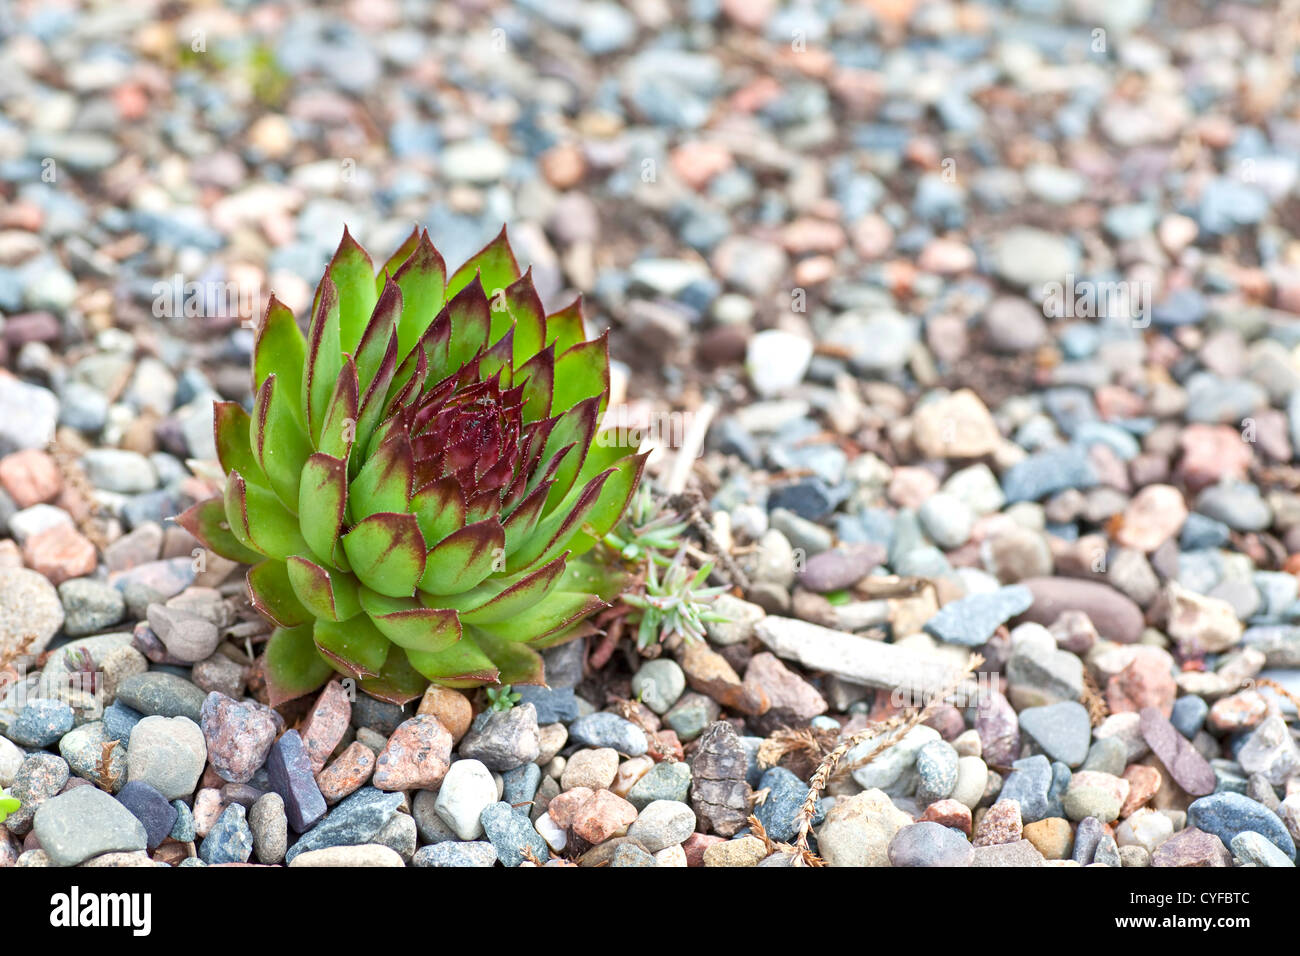 An alpine succulent forming a compact rosette in a gravel bed. Stock Photo